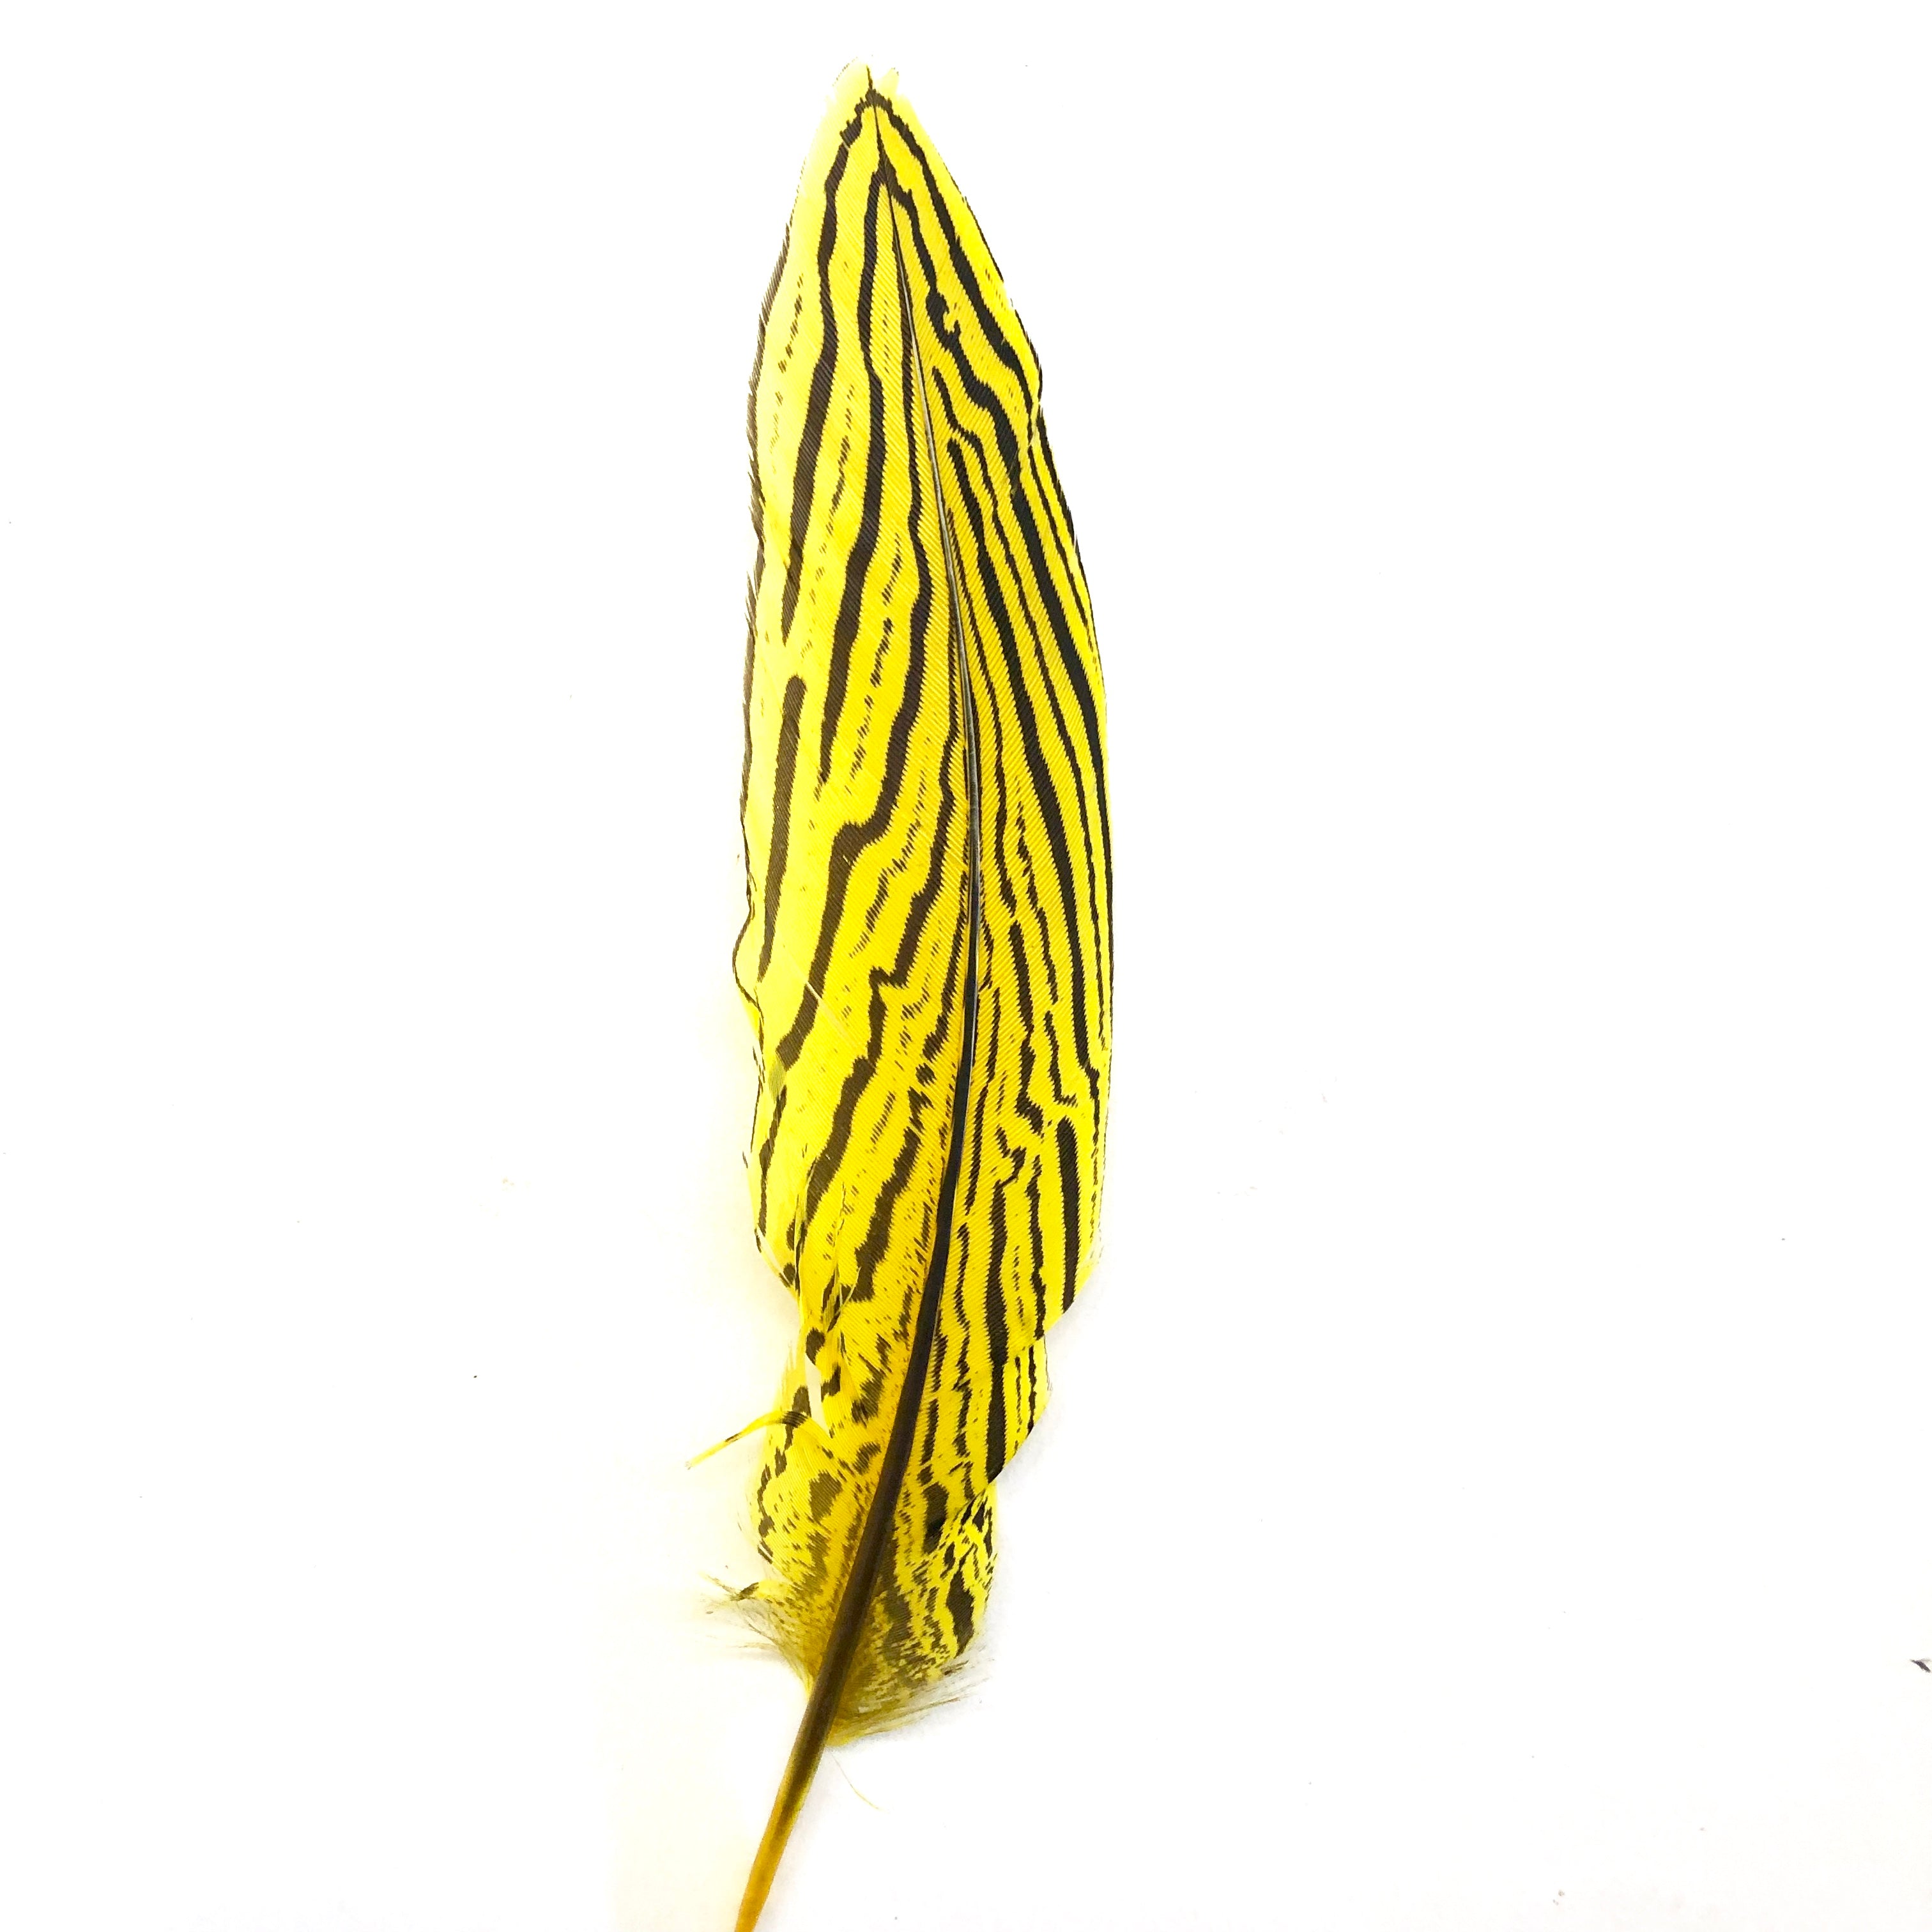 6" to 10" Silver Pheasant Tail Feather - Yellow